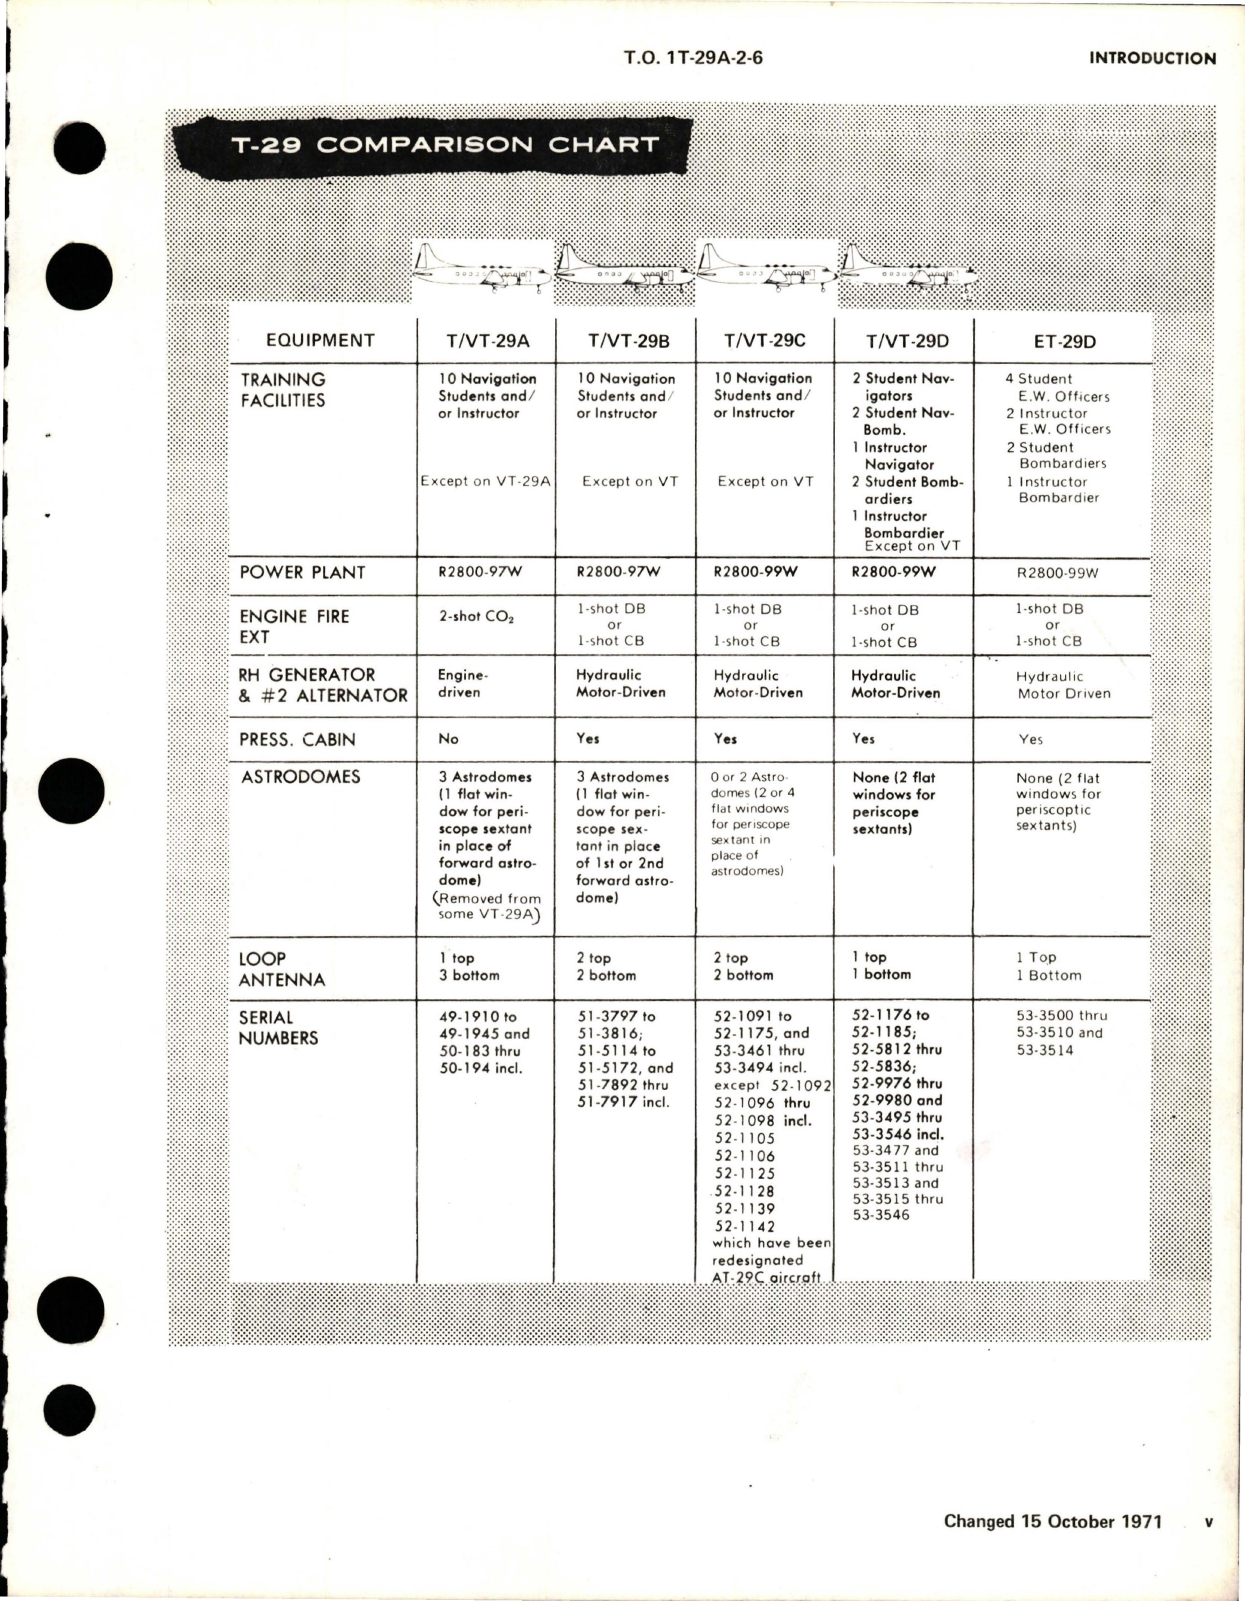 Sample page 9 from AirCorps Library document: Maintenance Manual for Fuel and Oil Systems for T-29A, T-29B, T-29C, and T-29D